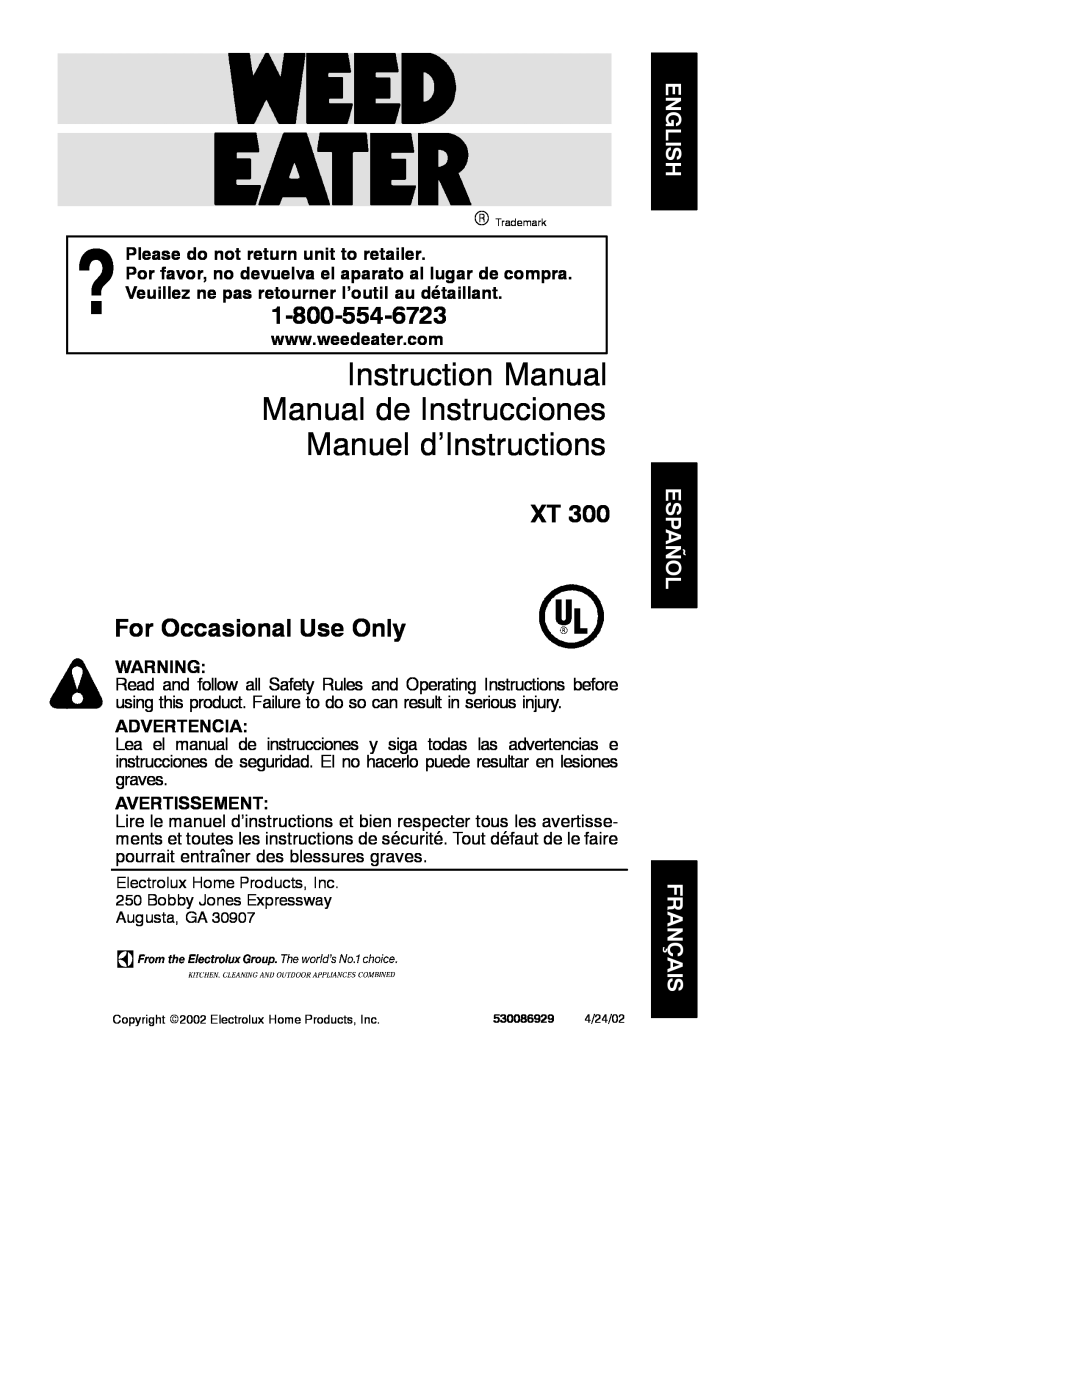 Weed Eater 530086929 instruction manual Please do not return unit to retailer, Advertencia, Avertissement 